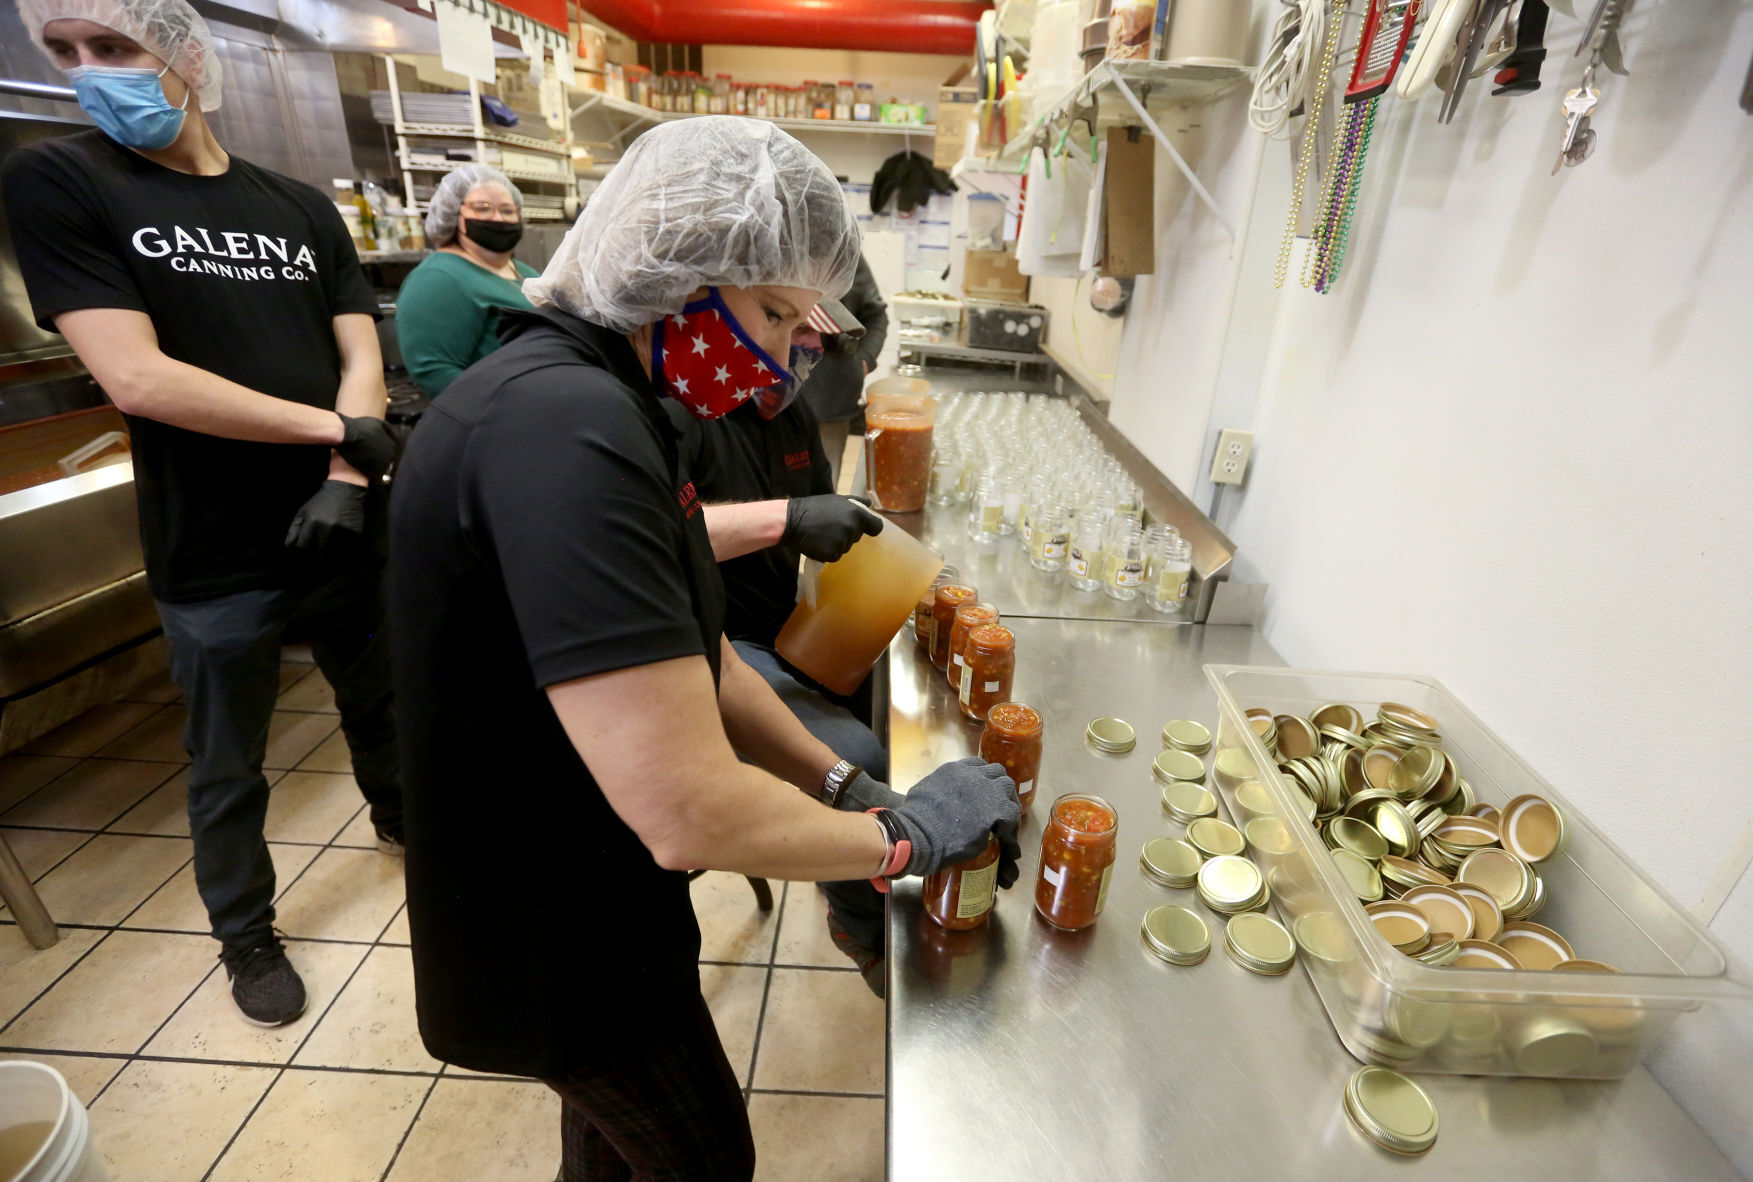 U.S. Rep. Cheri Bustos, D-Ill., puts lids on jars of roasted corn salsa at Galena Canning Co. in Galena, Ill., on Monday. Bustos also promoted federal legislation to help businesses’ succession planning. PHOTO CREDIT: JESSICA REILLY